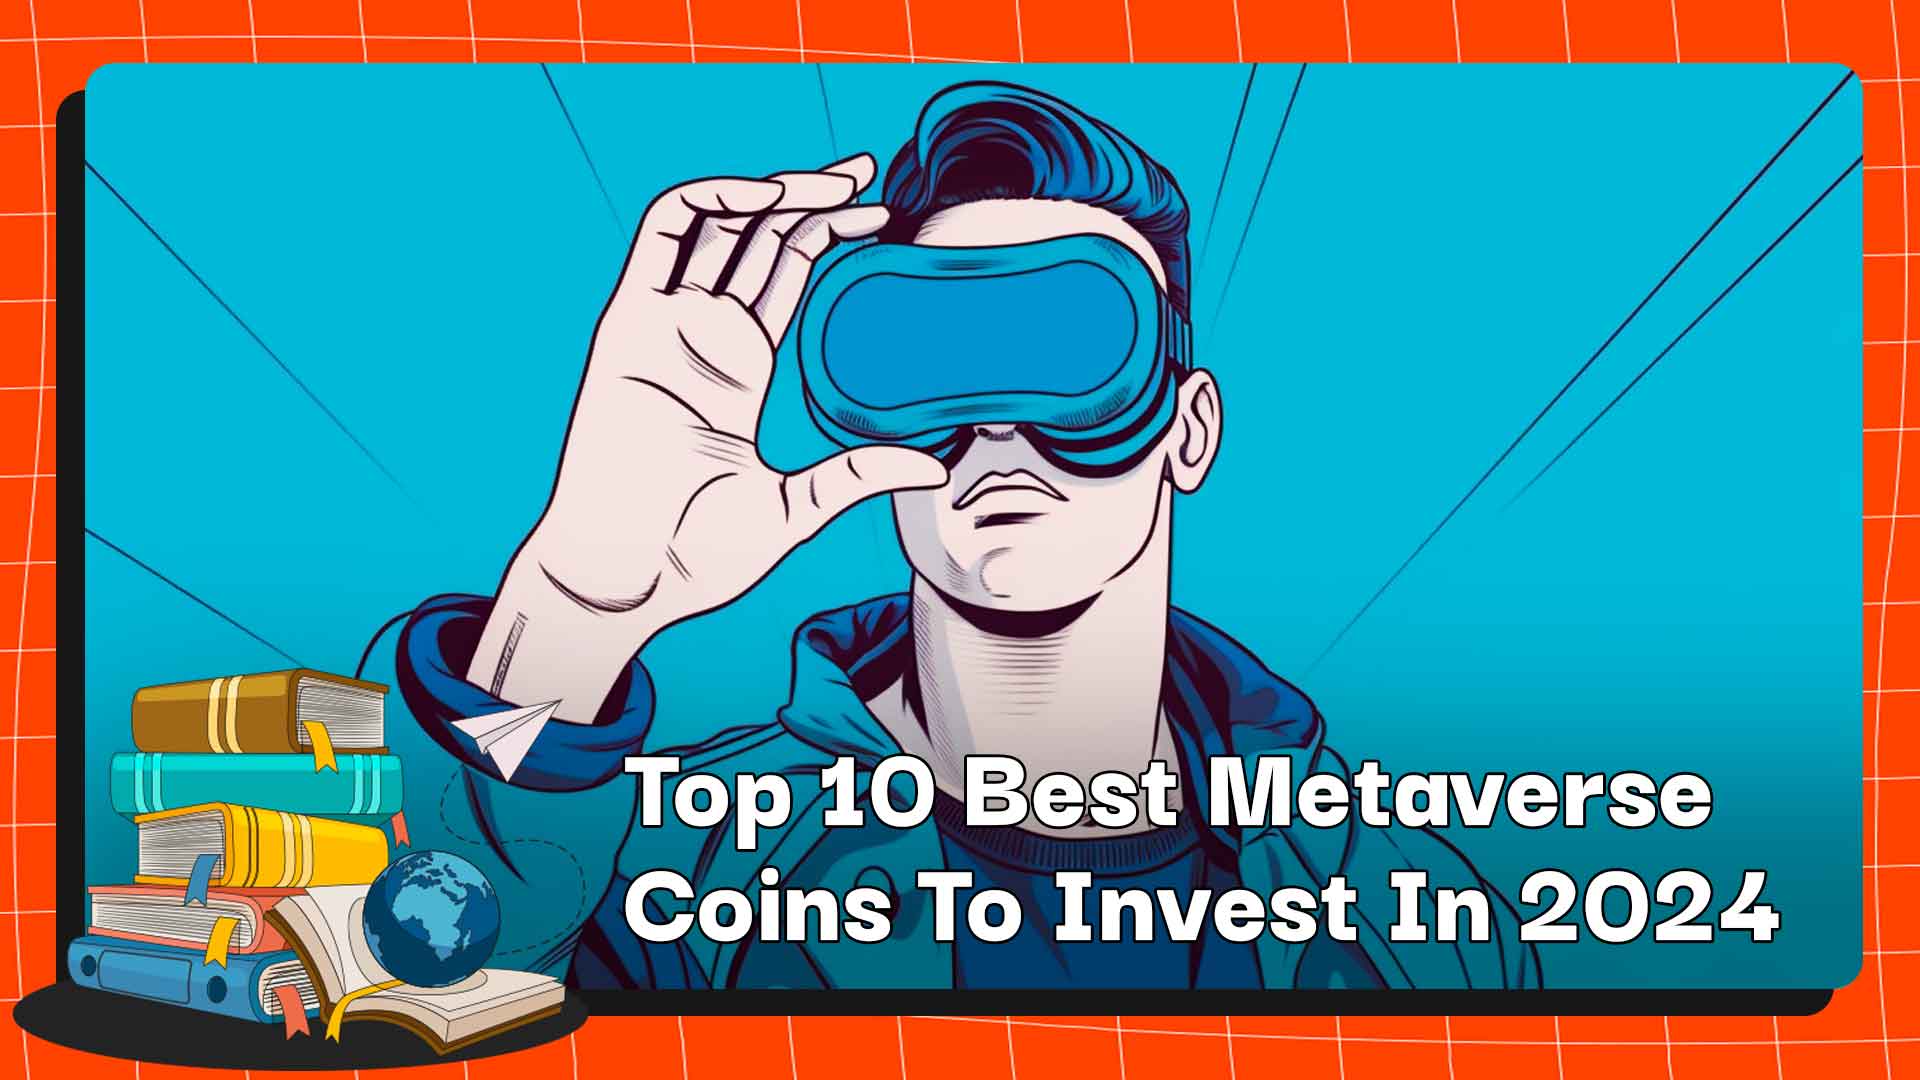 Top 10 Best Metaverse Coins To Invest In 2024